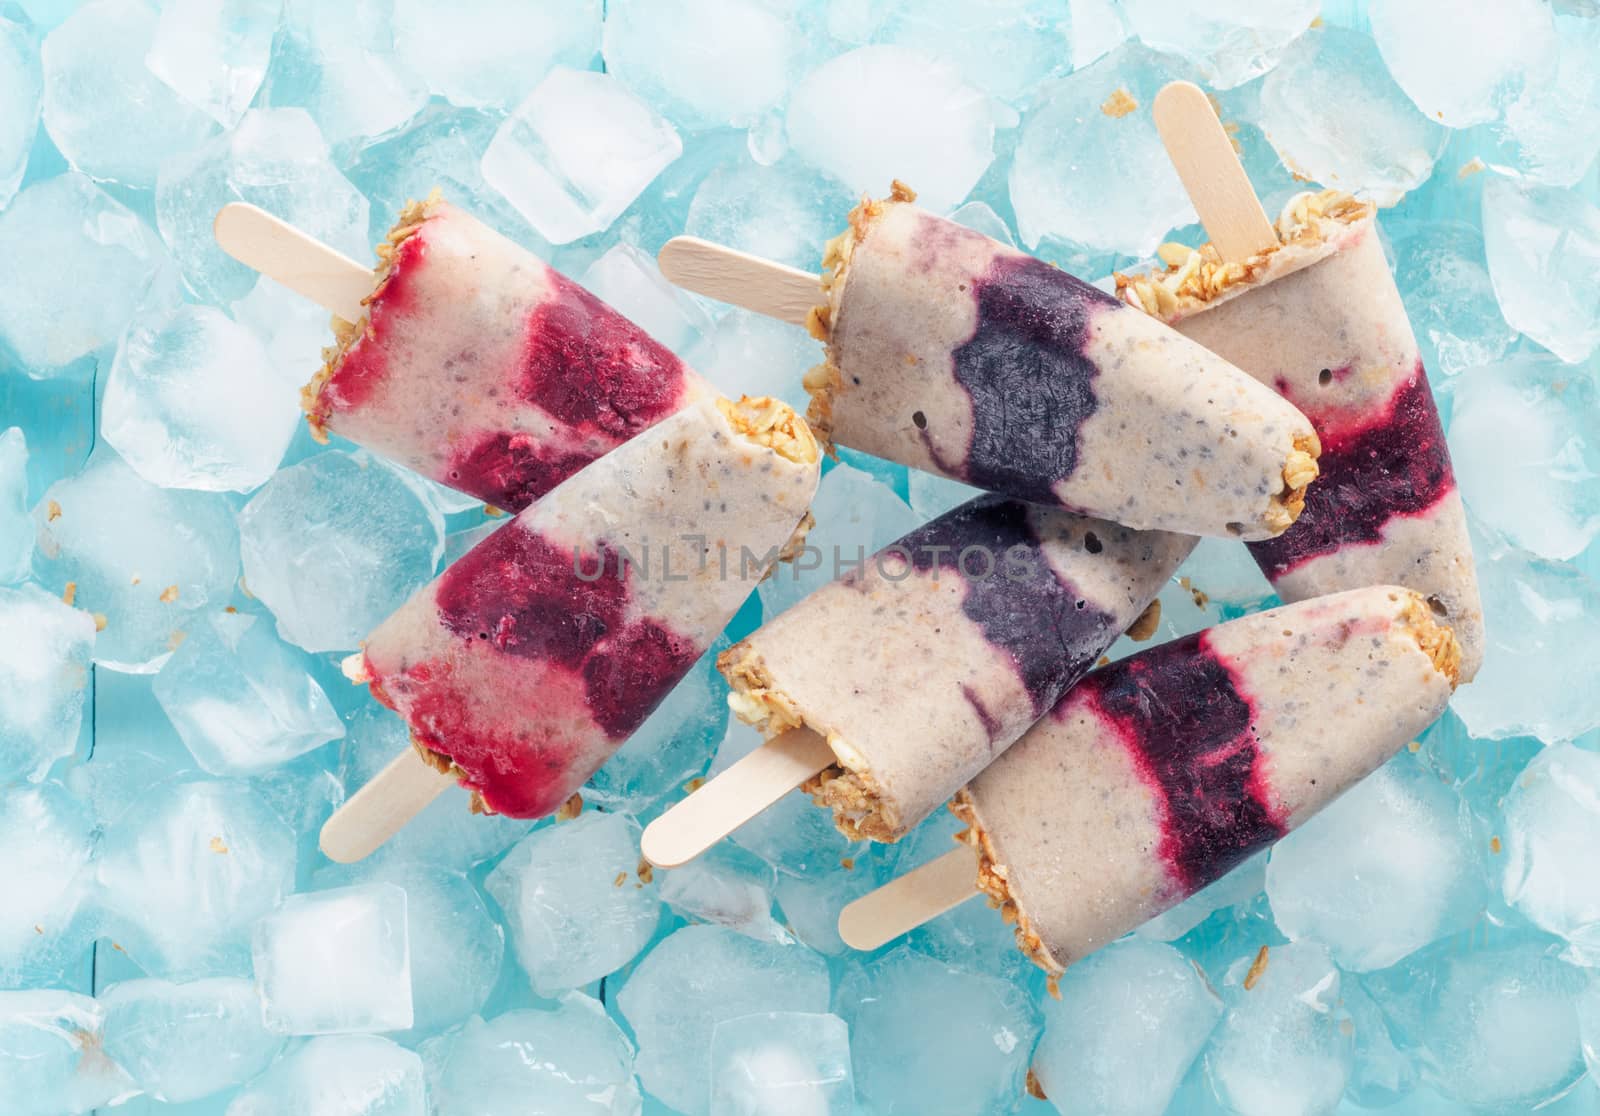 Homemade ice cream popsicle with berries, granola and chia seeds. Healthy summer breakfast concept. Popsicles from yogurt and banana with berries and granola. Top view. Copyspace